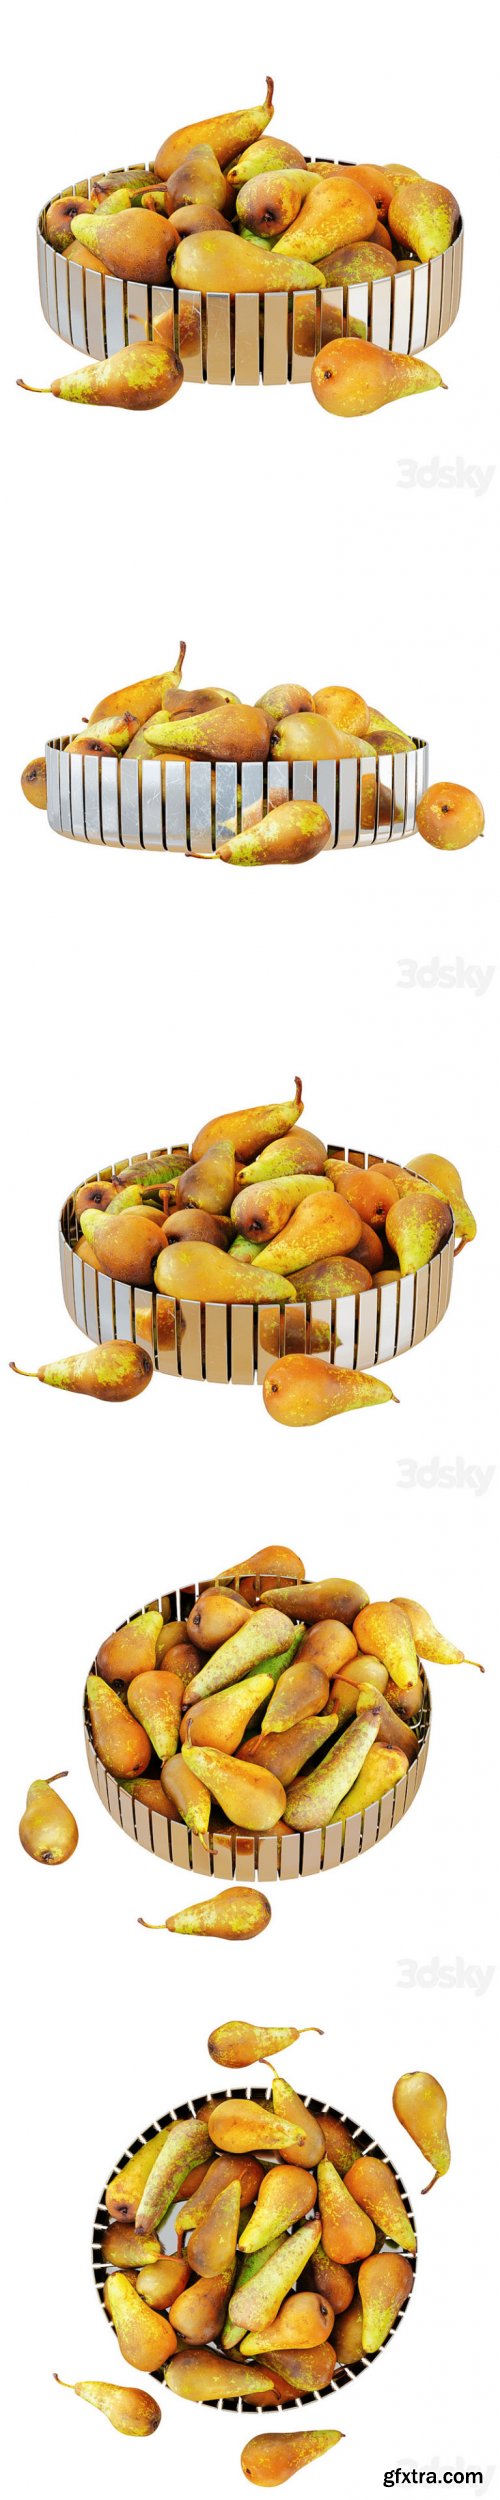 Pear Conference in Metal Round Vase 